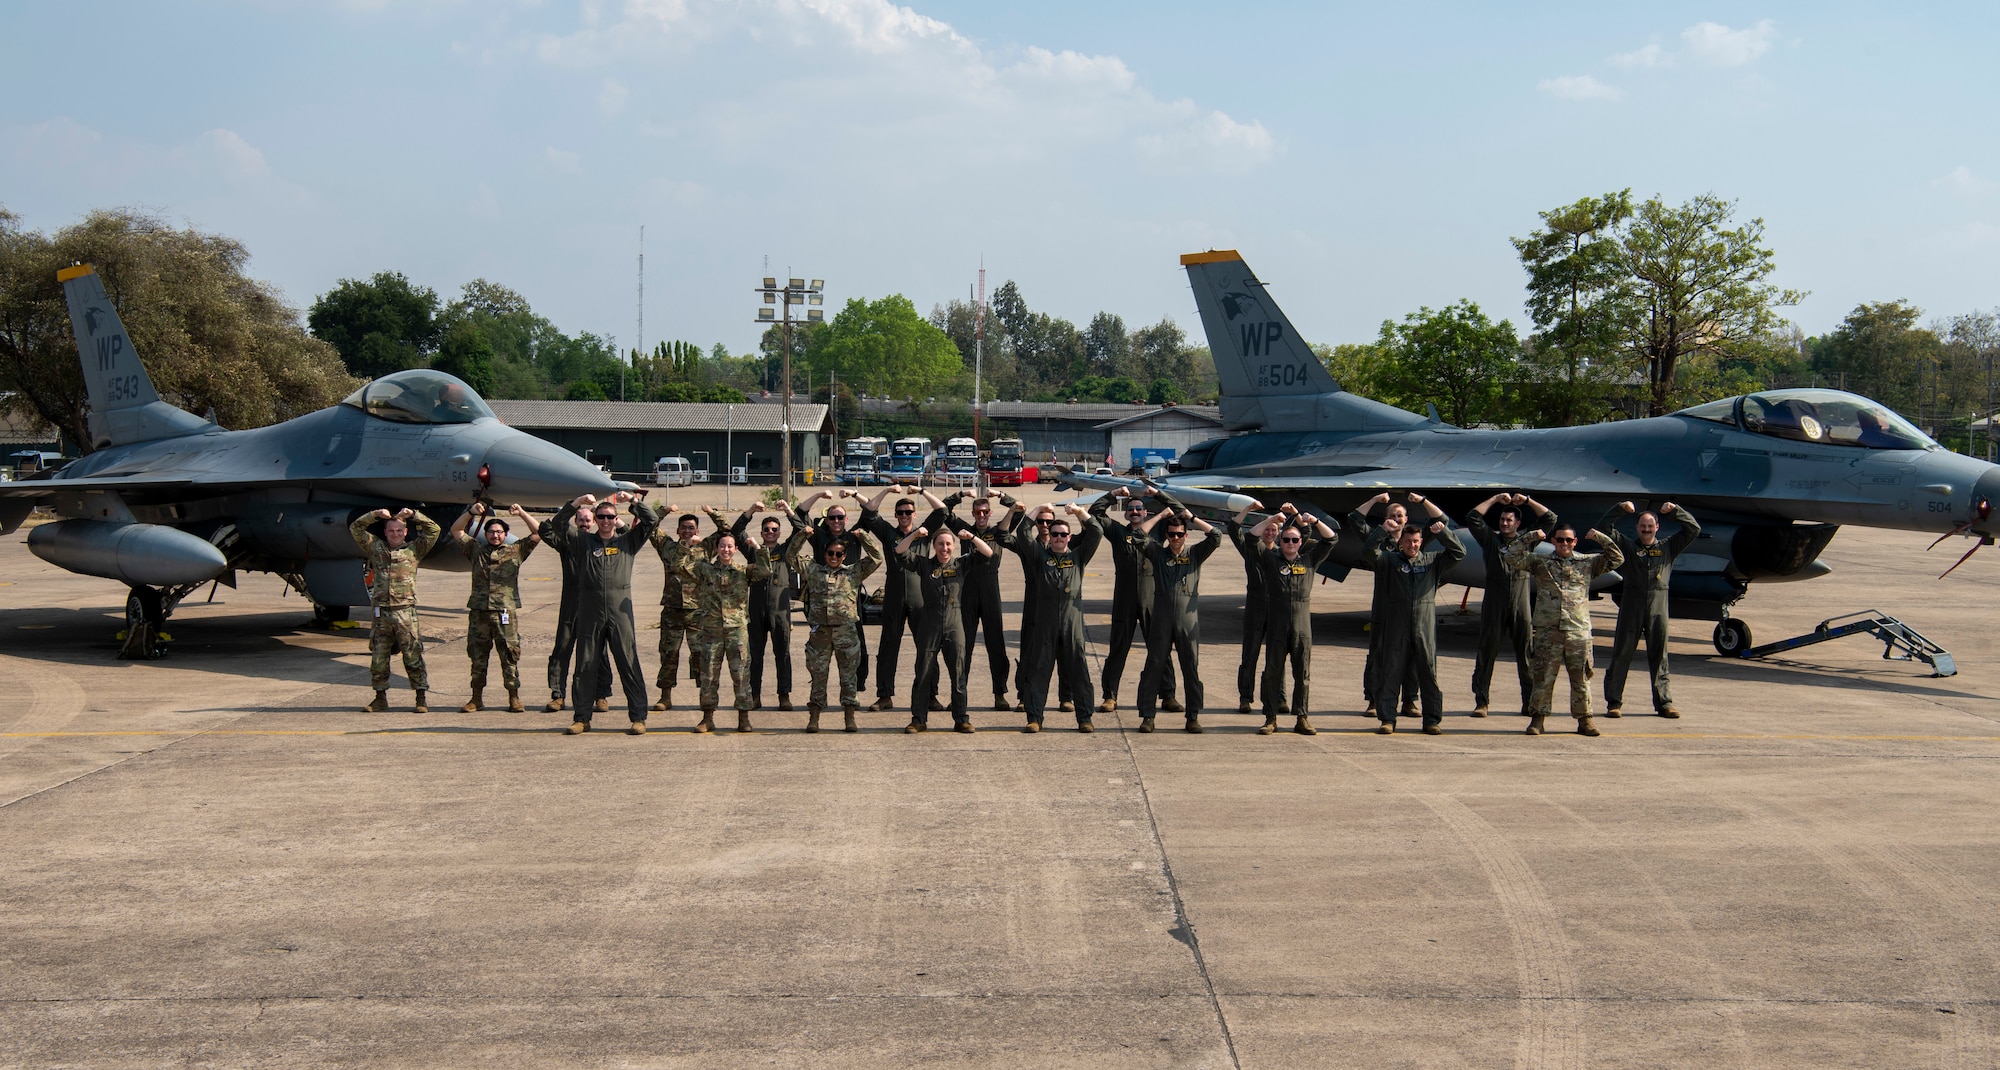 Airmen with the 80th Fighter Squadron strike a ‘Crush ‘Em’ pose for a group photo in front of two F-16 Fighting Falcons